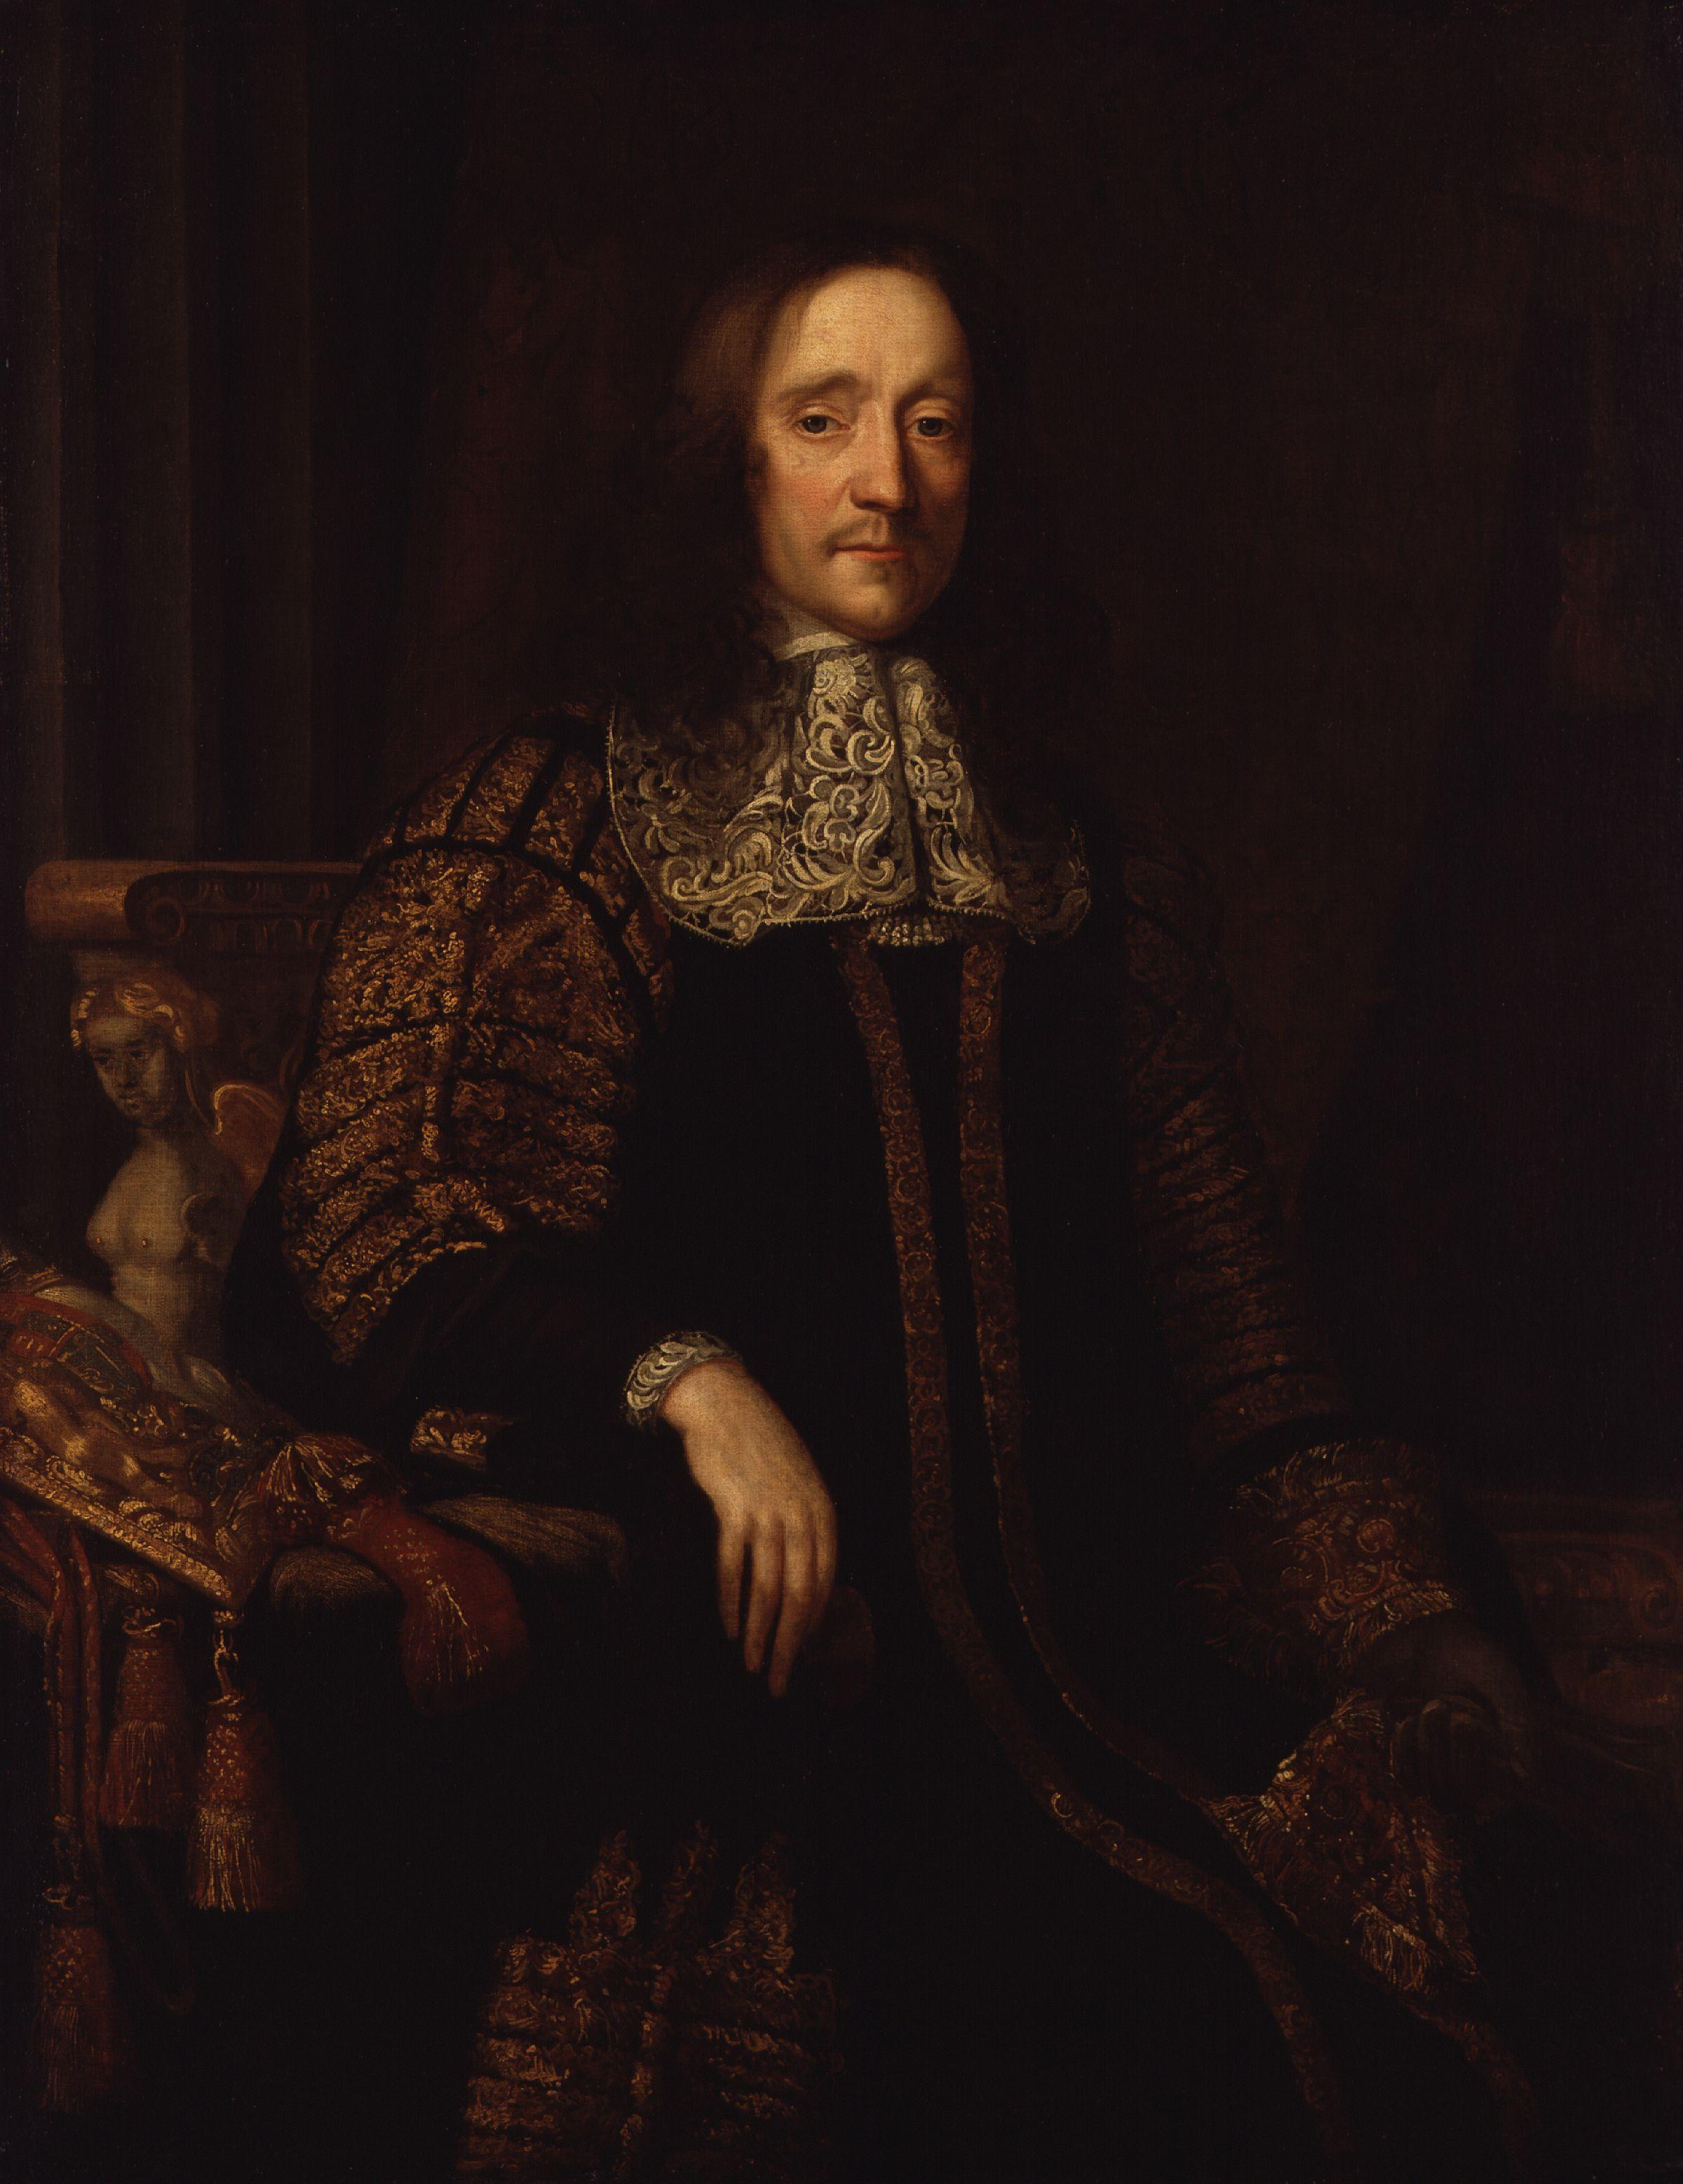 Arthur Annesley, 1st Earl of Anglesey by John Michael Wright